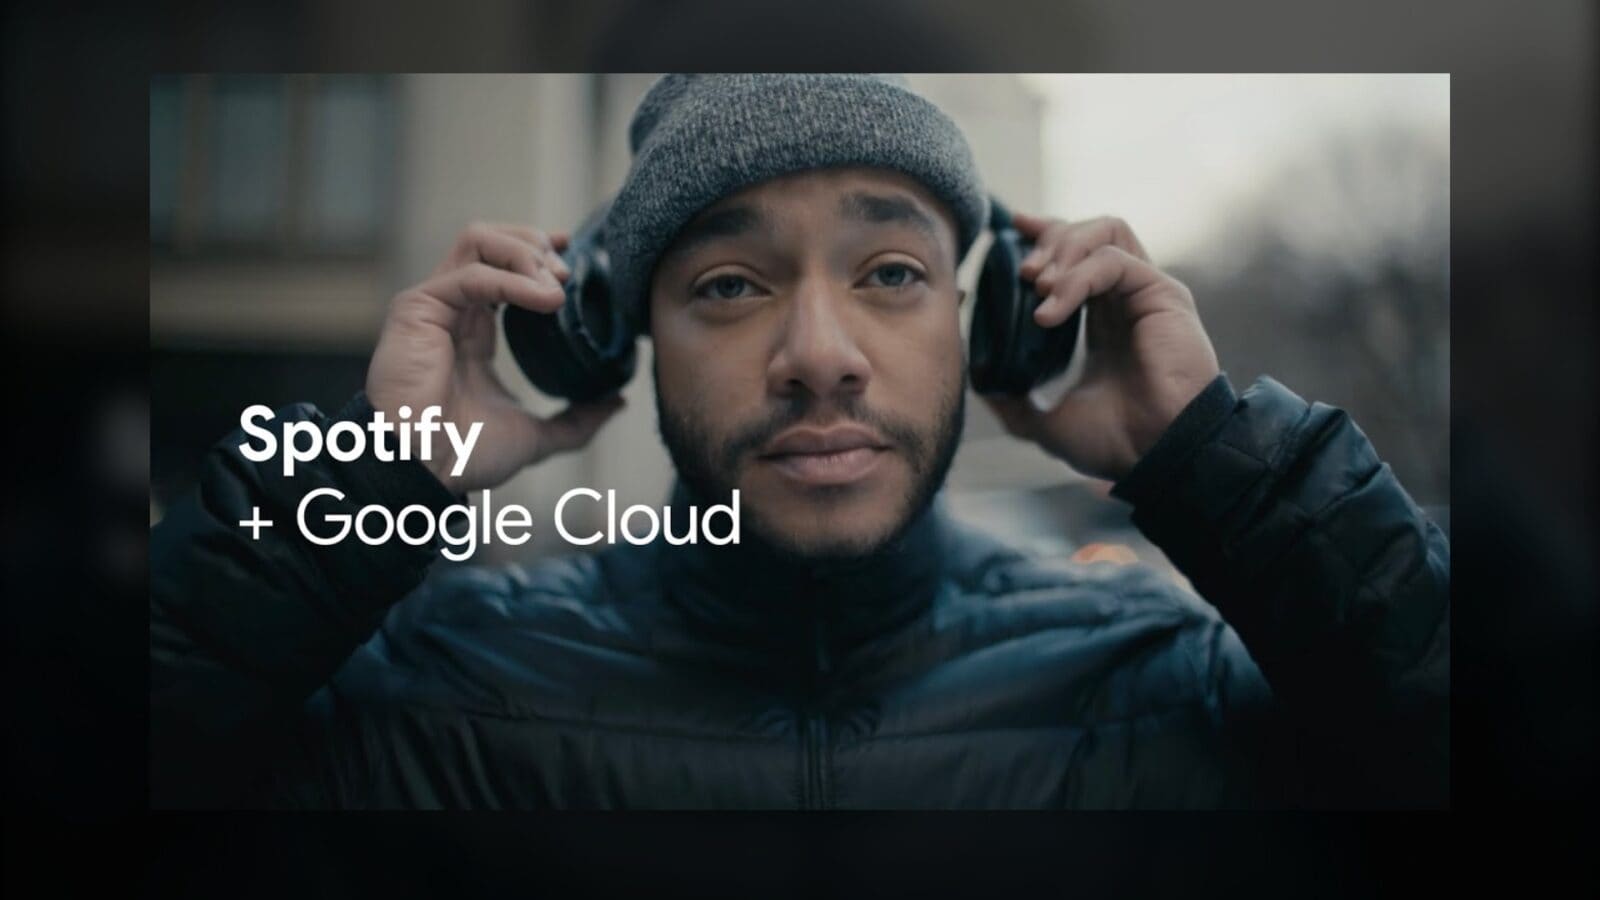 Spotify and Google Cloud Extend Their Partnership by Integrating Enhanced AI Features